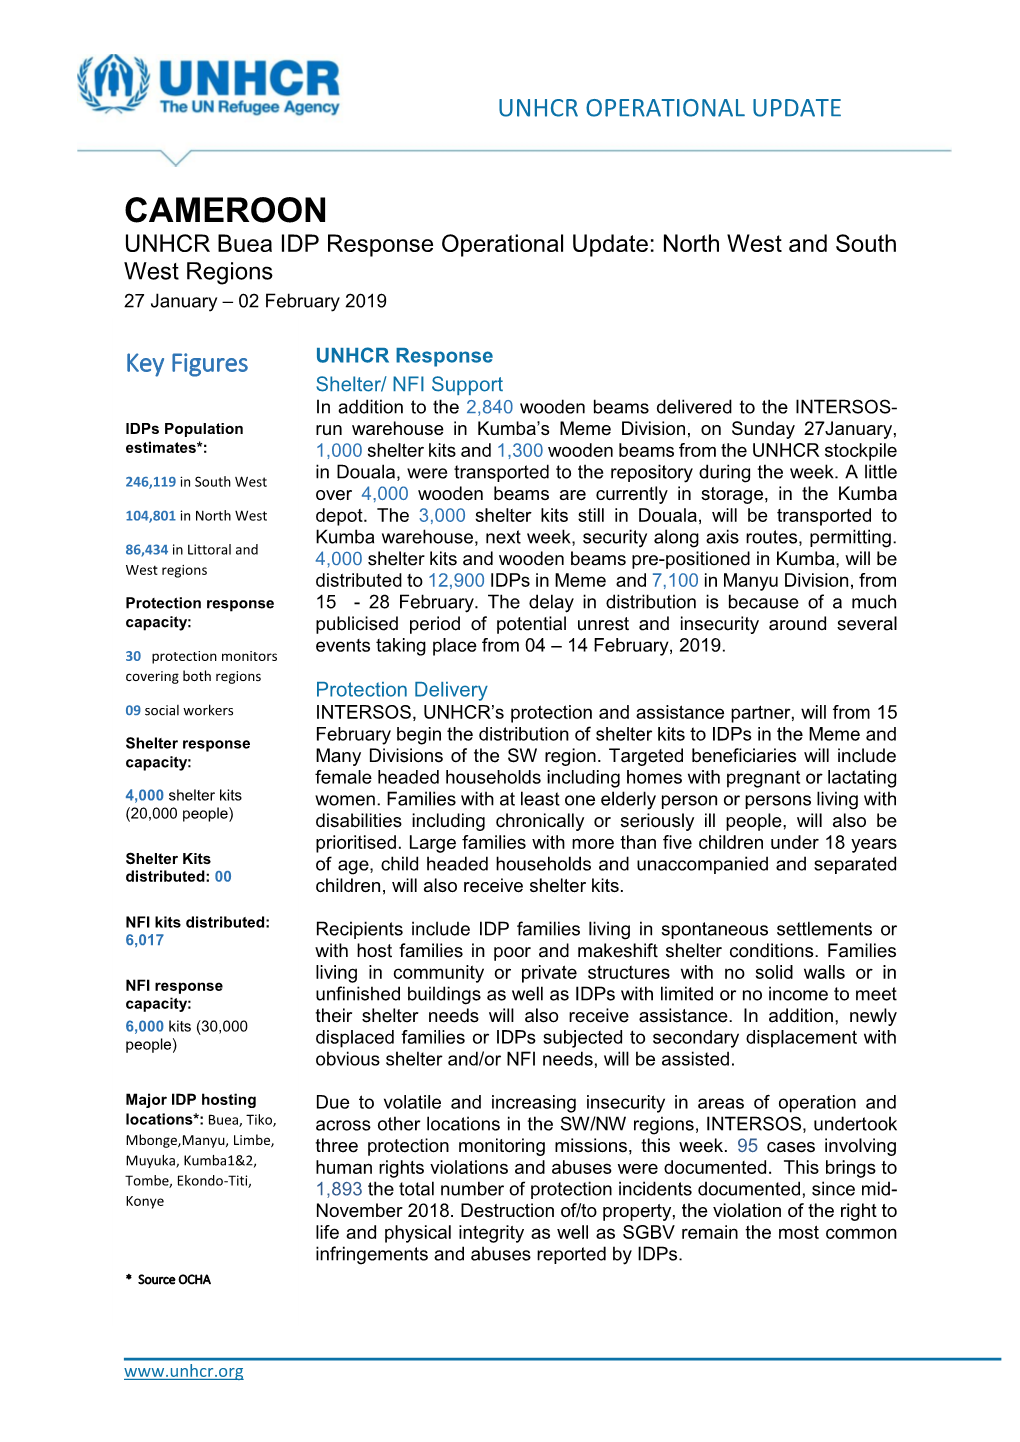 CAMEROON UNHCR Buea IDP Response Operational Update: North West and South West Regions 27 January – 02 February 2019